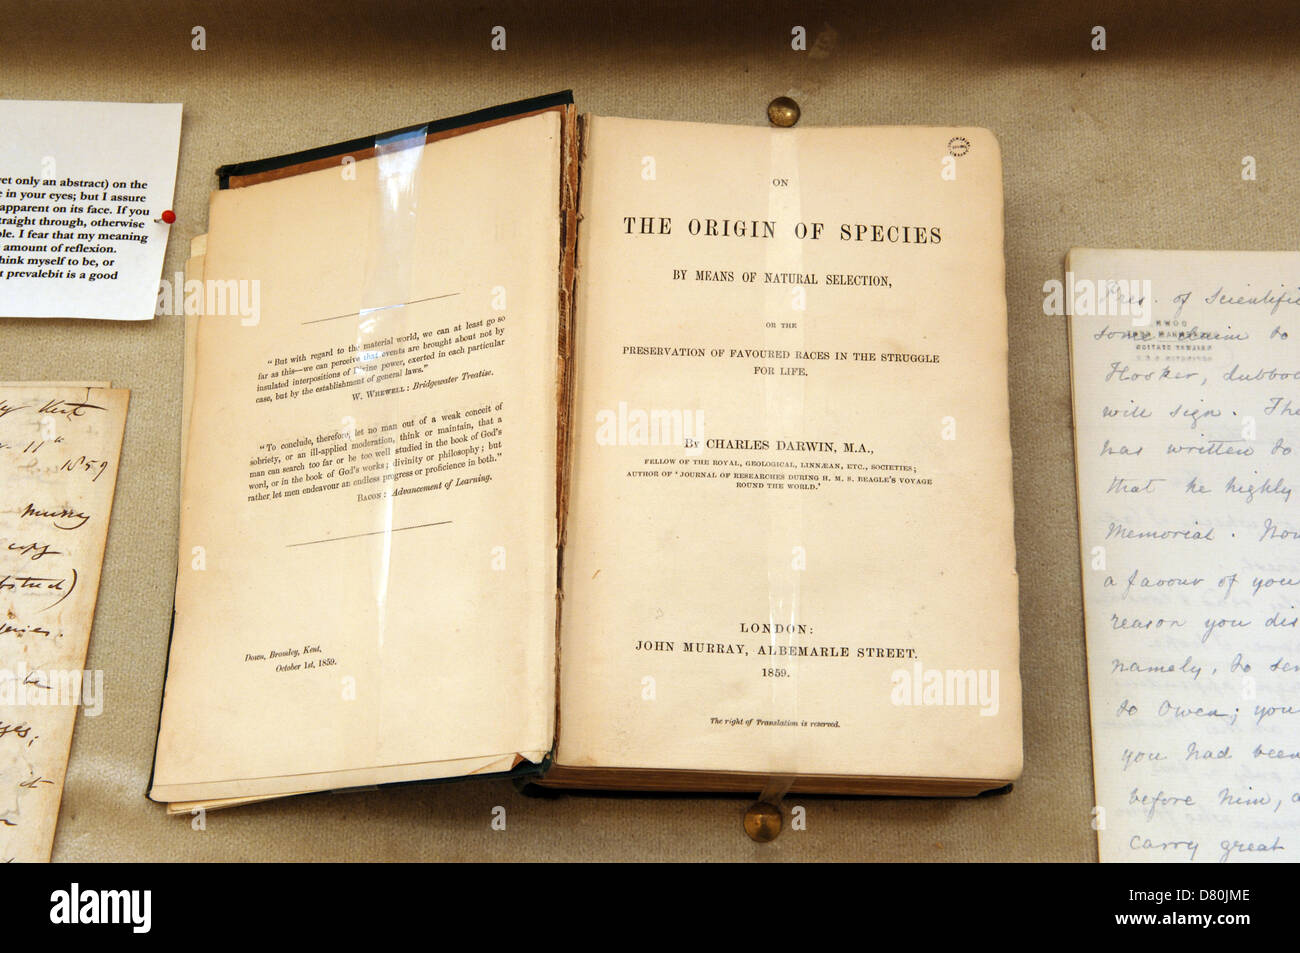 First edition (1859) of 'On The Origin Of Species' by Charles Darwin in Shrewsbury School library. Darwin was a former pupil. Stock Photo